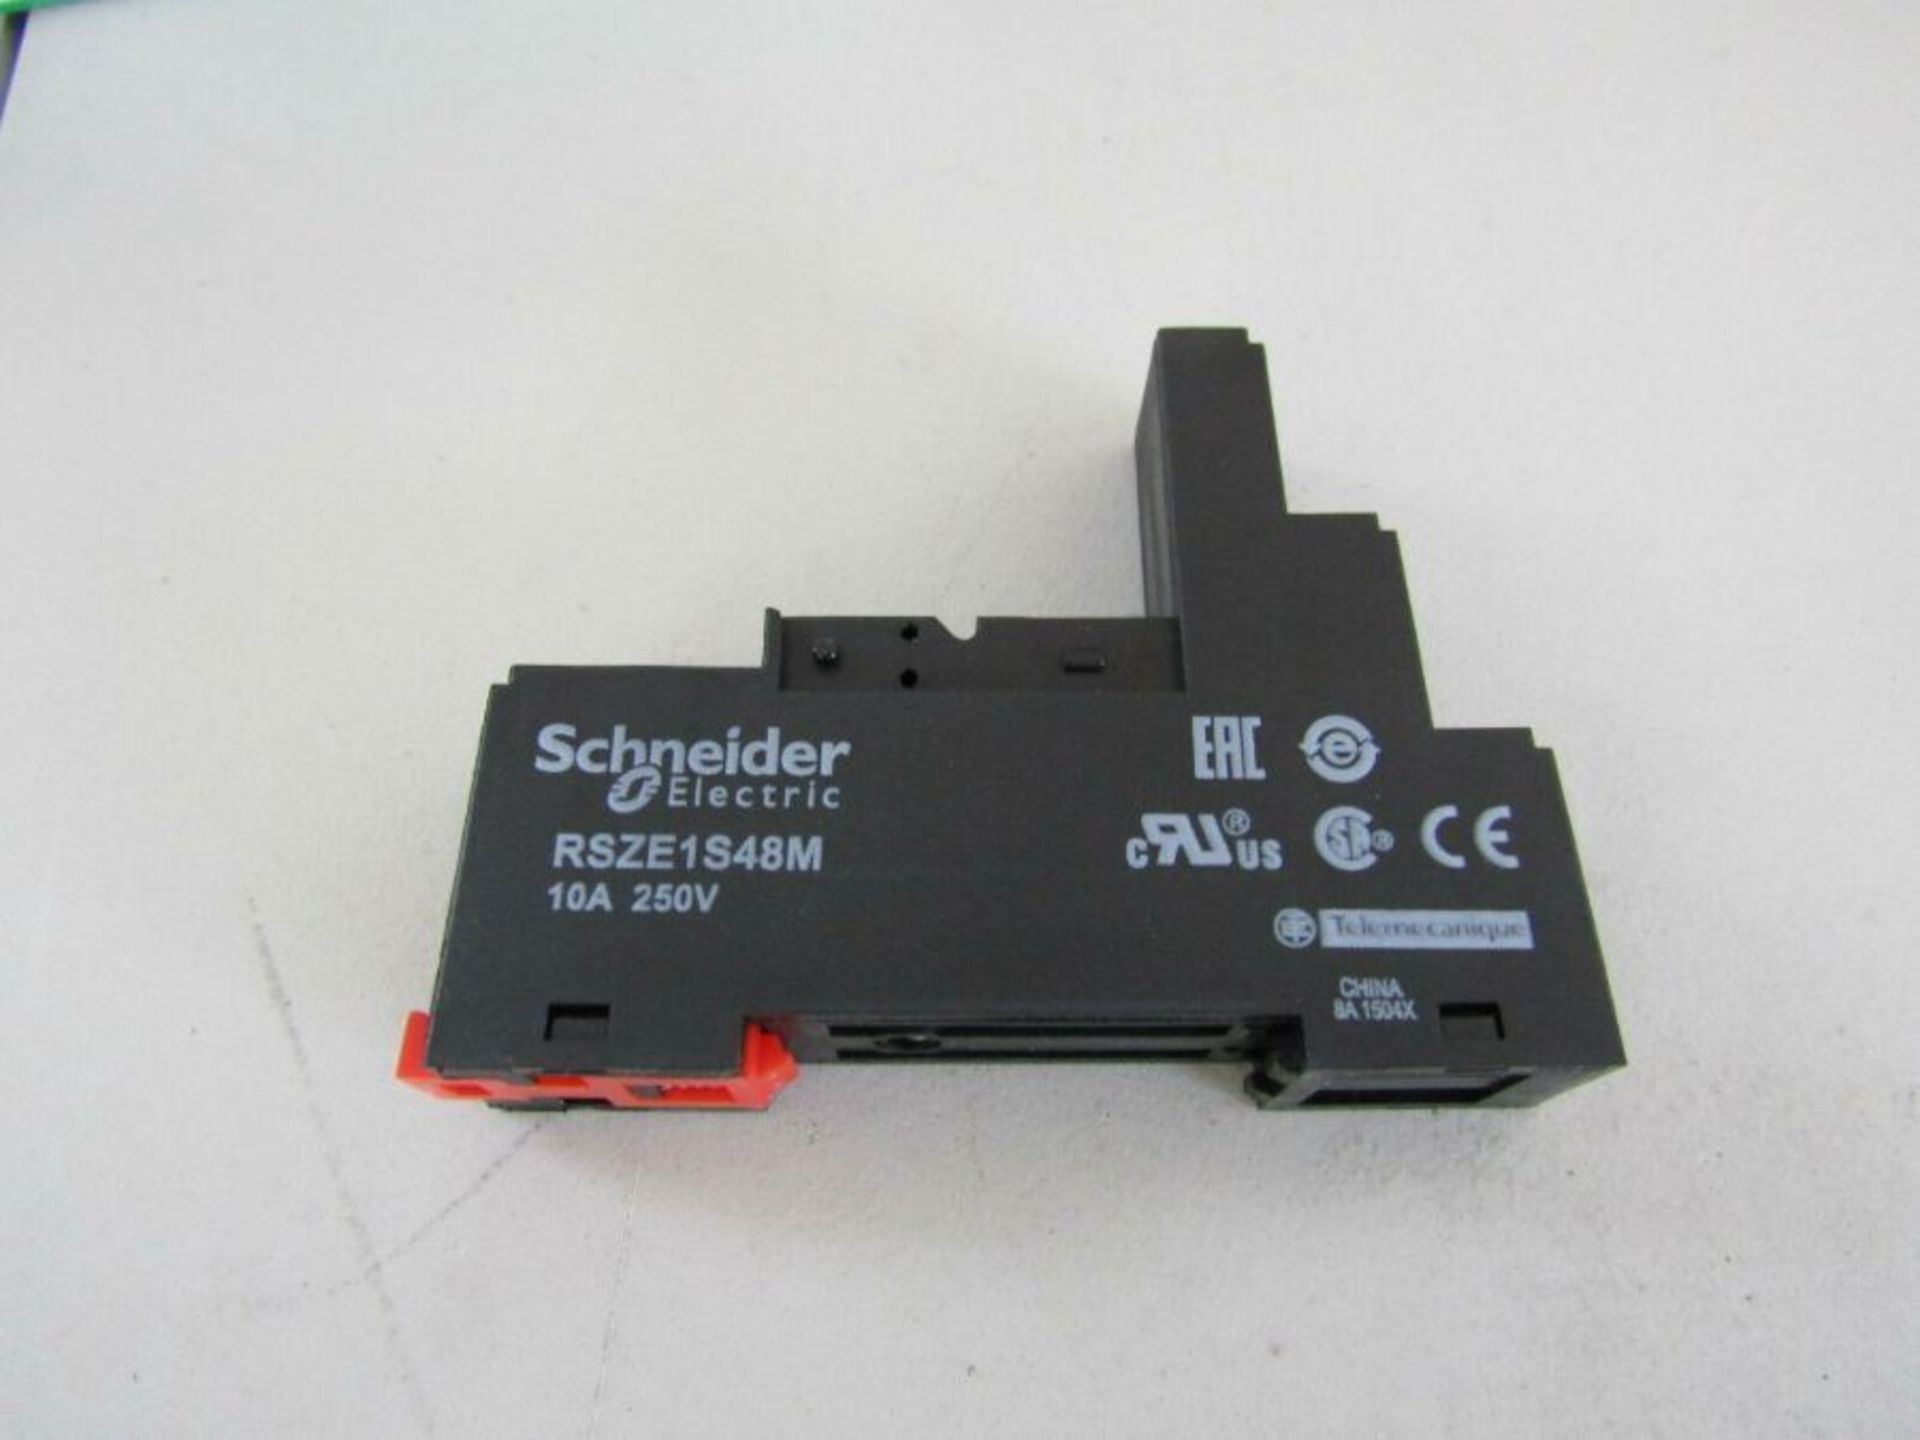 200 x SCHNEIDER RSZE1S48M Relay Socket for RSB Series - (20 boxes of 10) S2 - 8497667 - Image 5 of 6